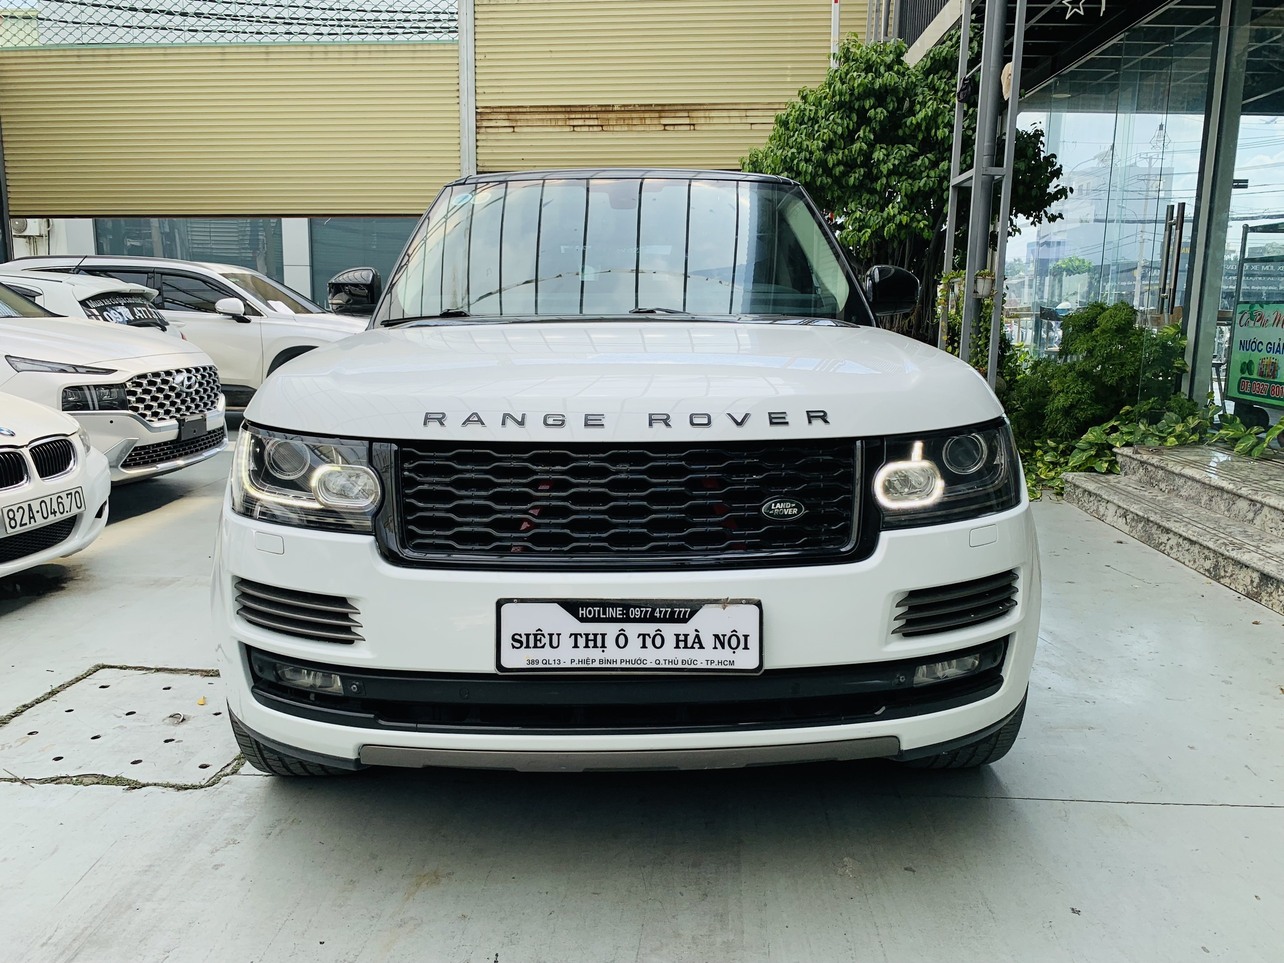 LANDROVER AUTOBIAGRAPHY 4X4 DẦU 2014